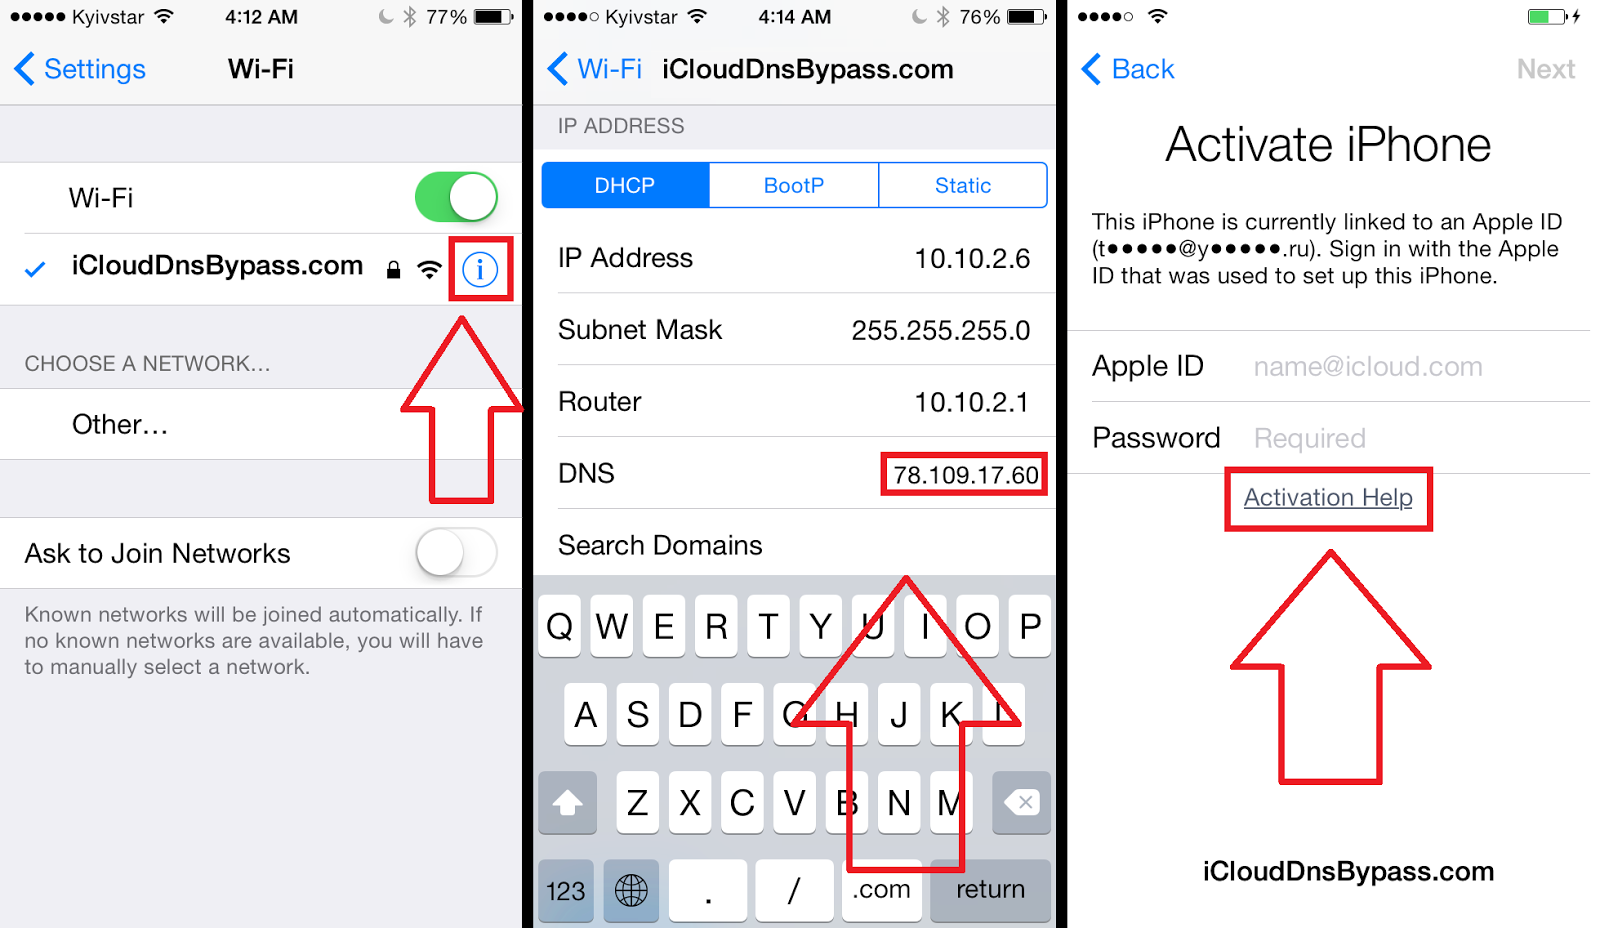 free iphone activation lock bypass tool download